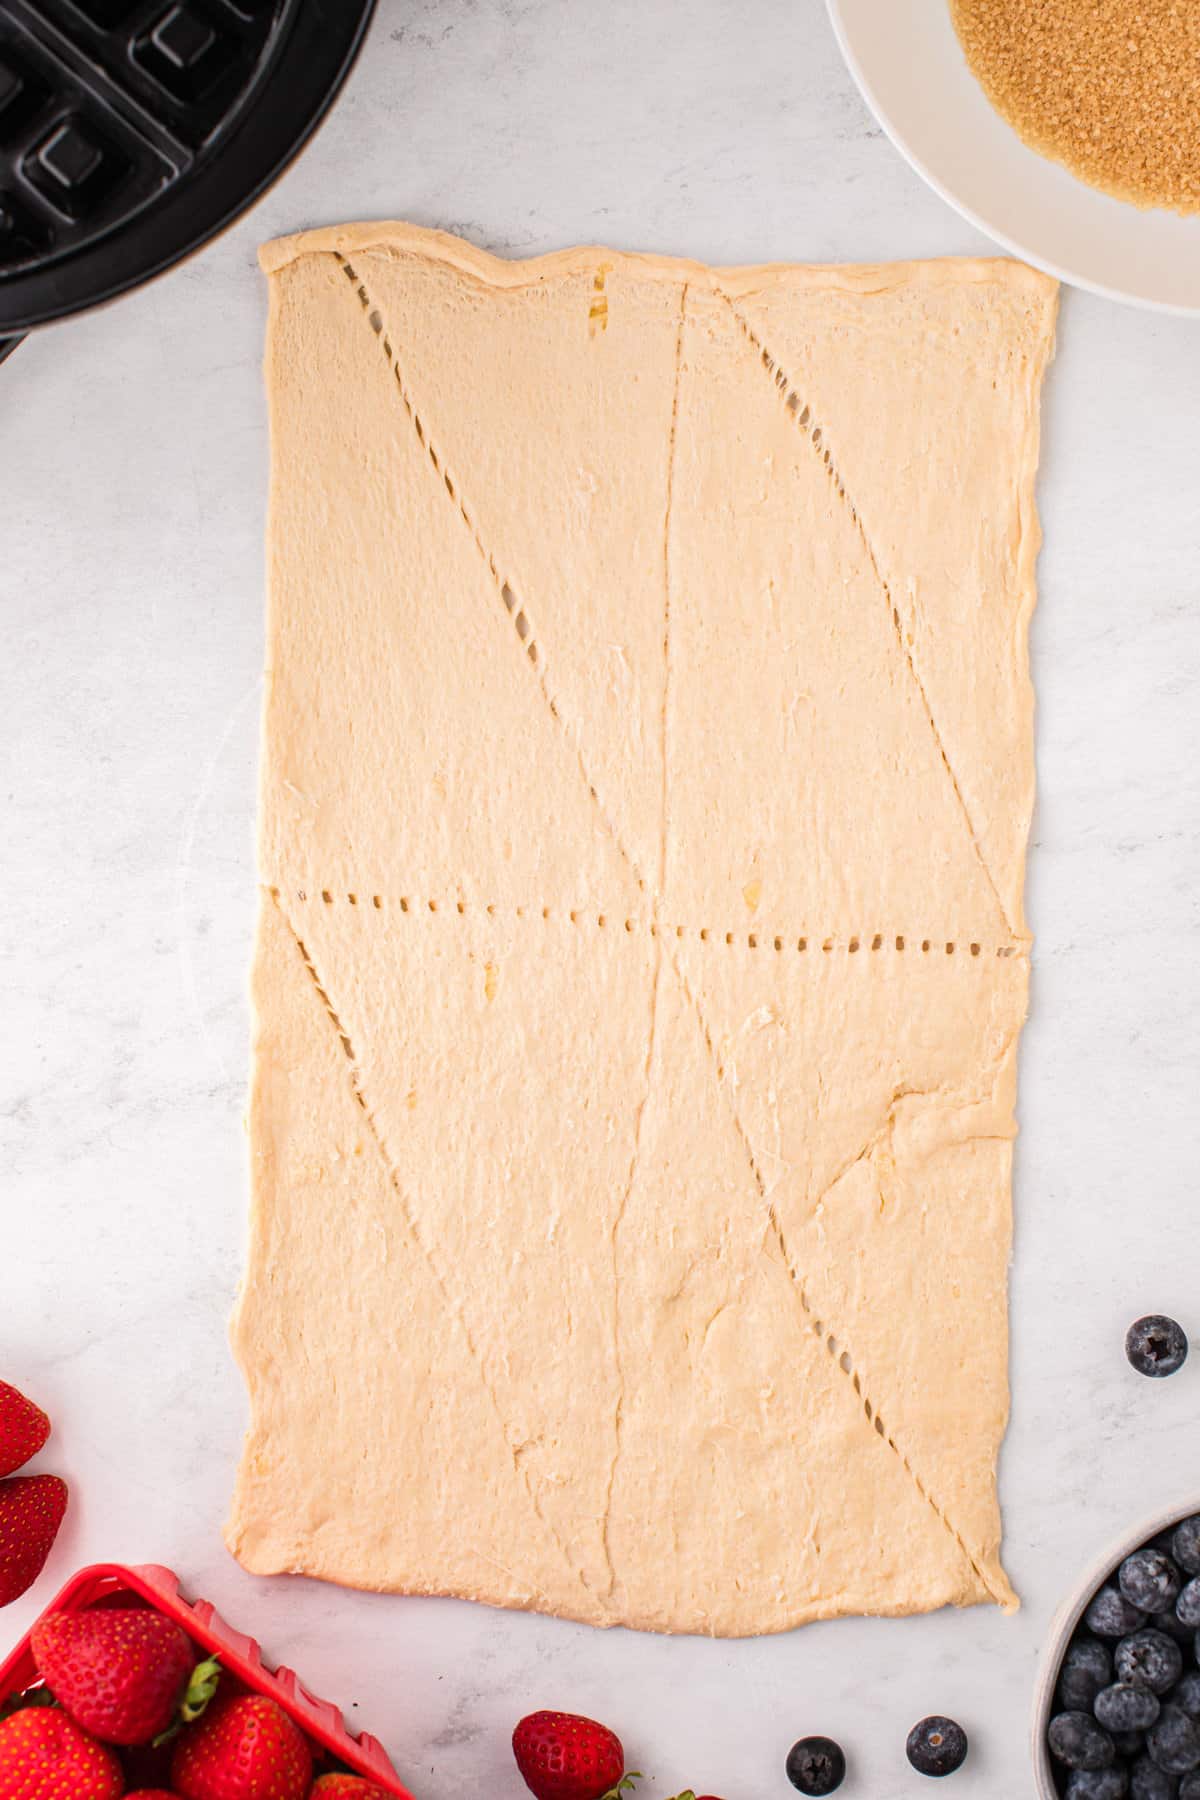 Unroll the Crescent Roll Dough and lay flat.